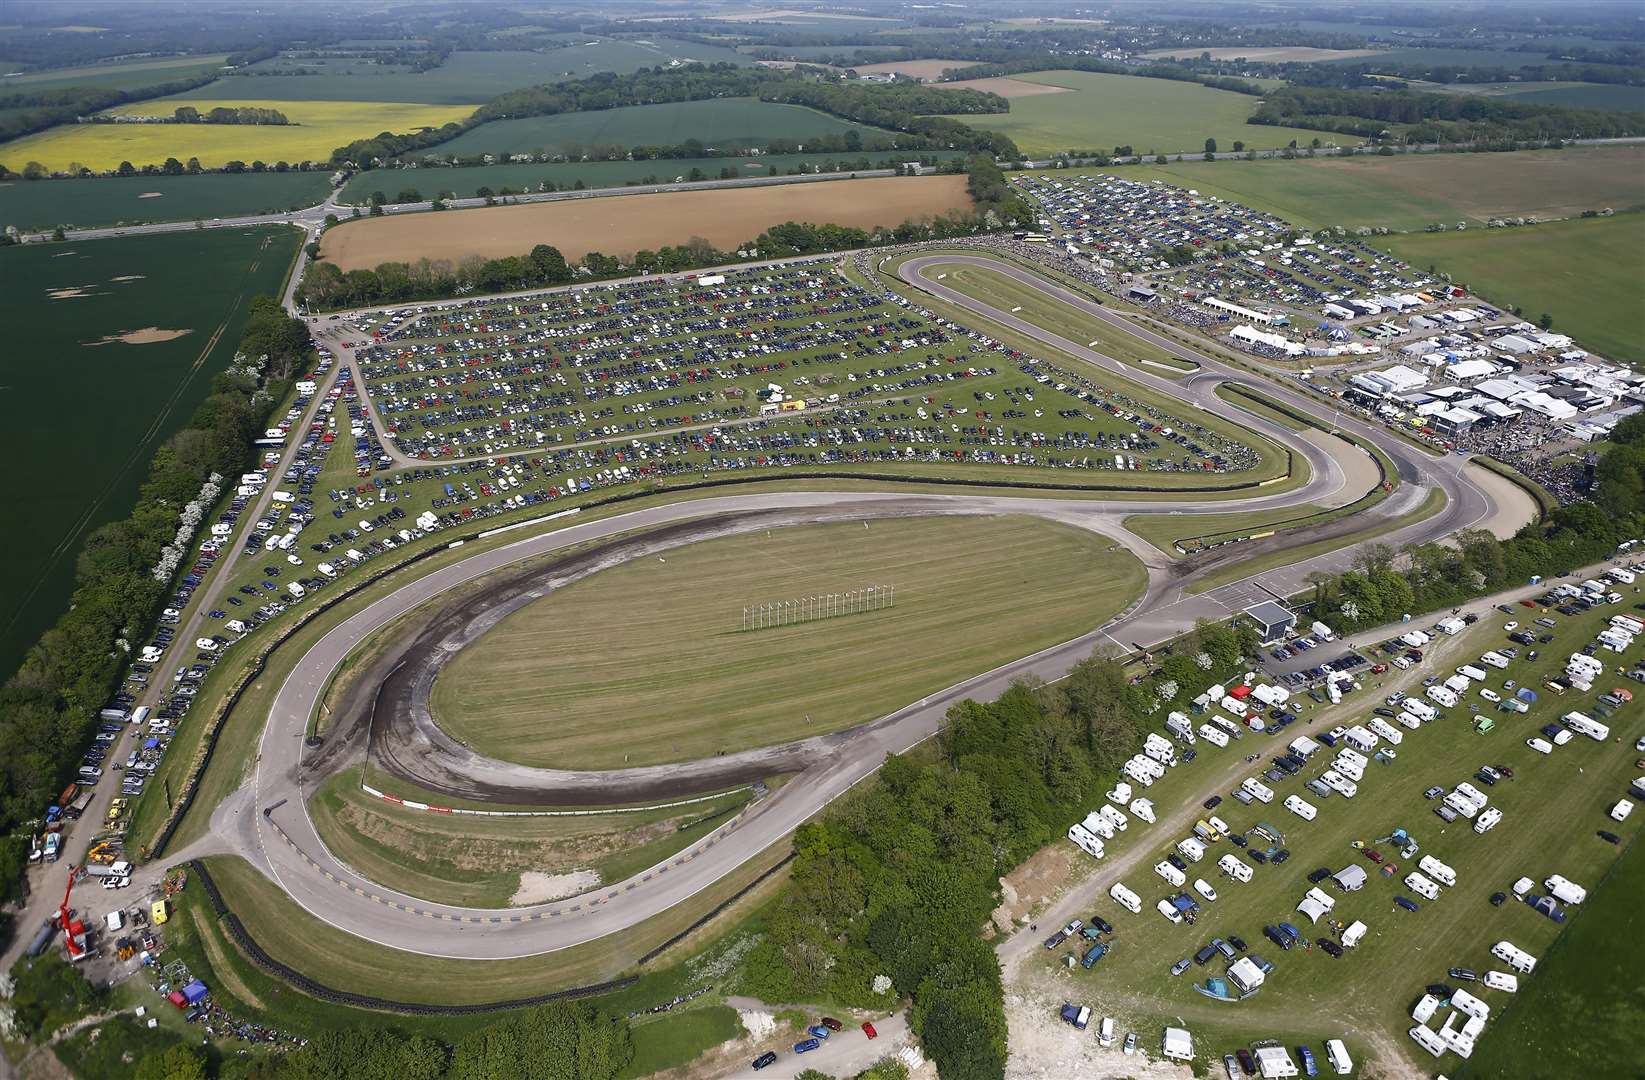 A packed Lydden pictured during the World Rallycross event in 2016. Picture: Matt Bristow